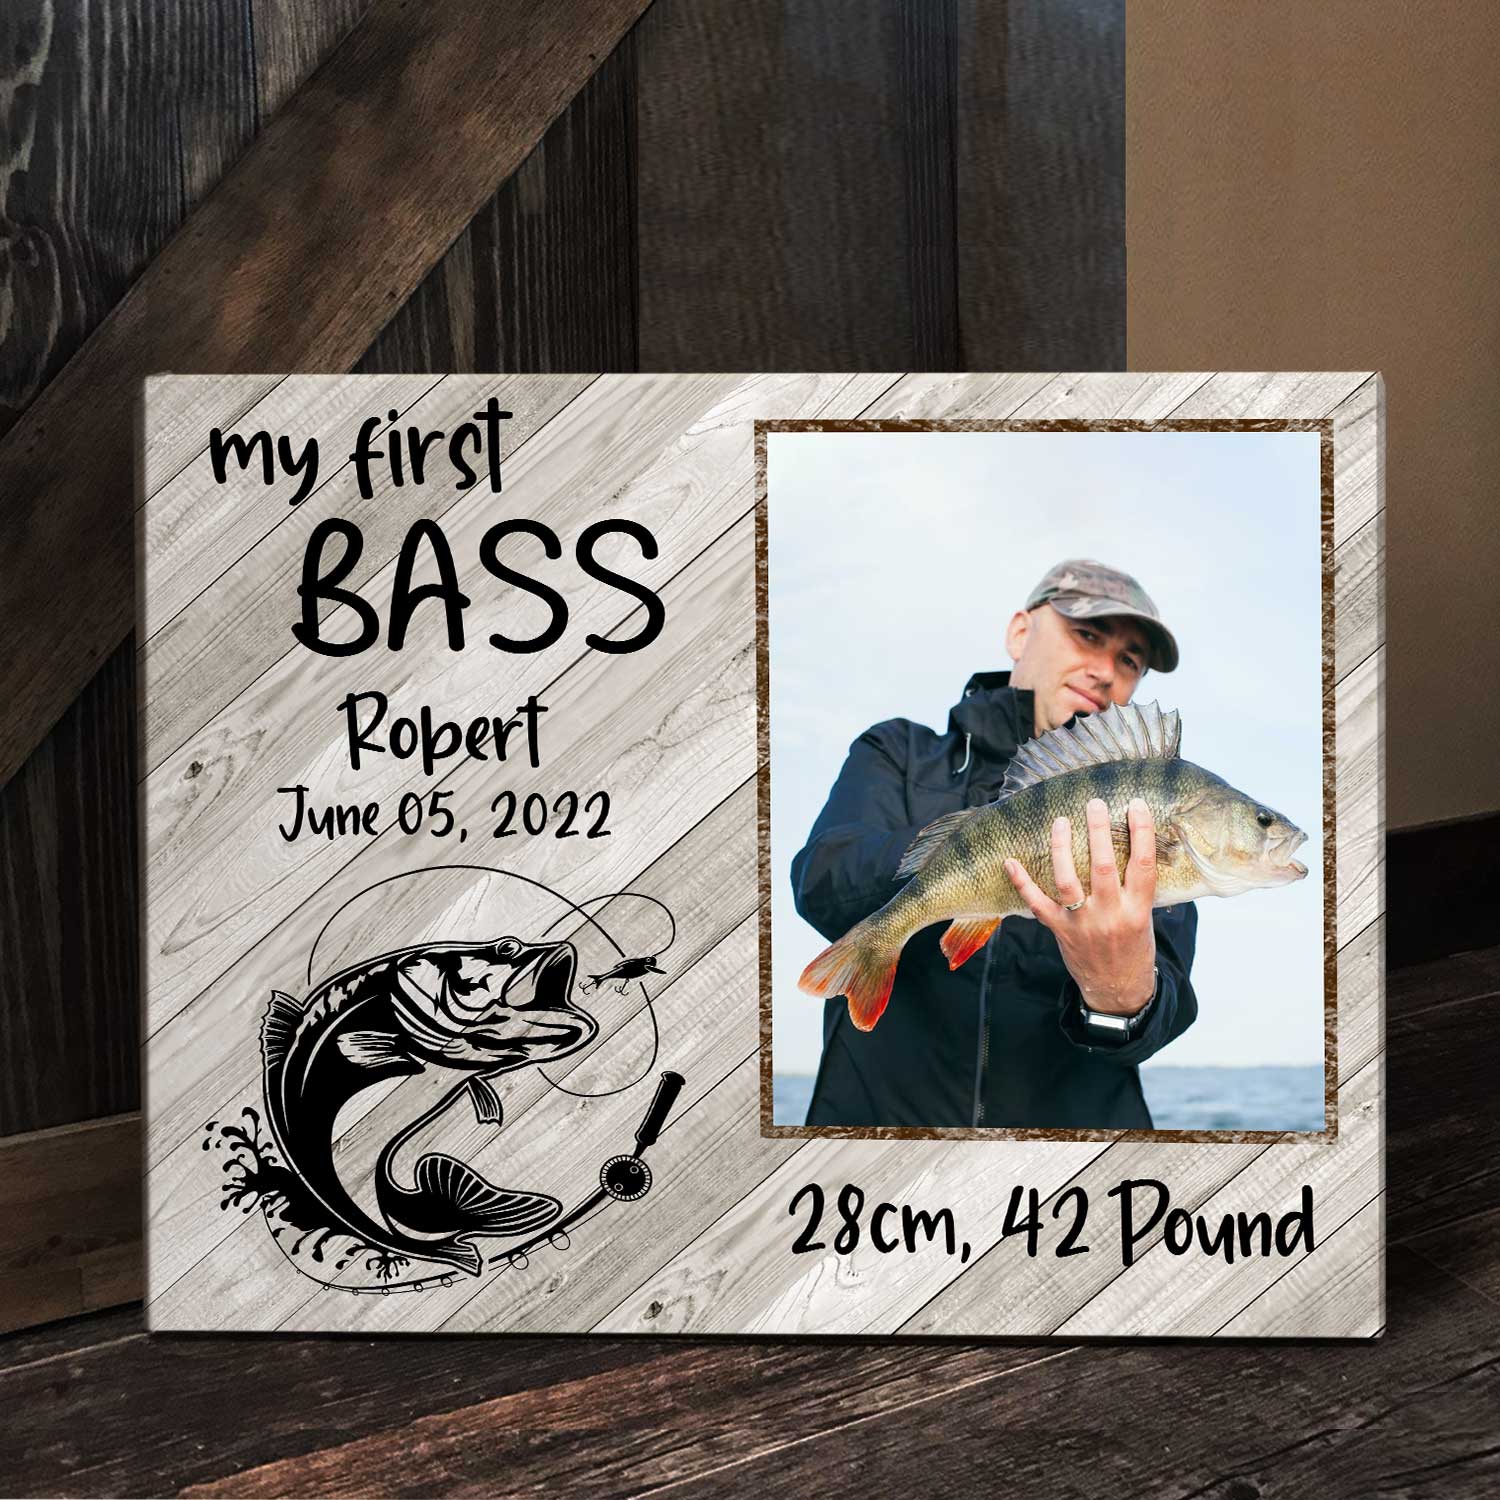 My First Bass Photo Gift Canvas, Custom Fishing Gift For Men, Father's Day  Fishing Gift for Grandpa, Best Gifts for Fisherman - Wrapped Canvas, 14x11